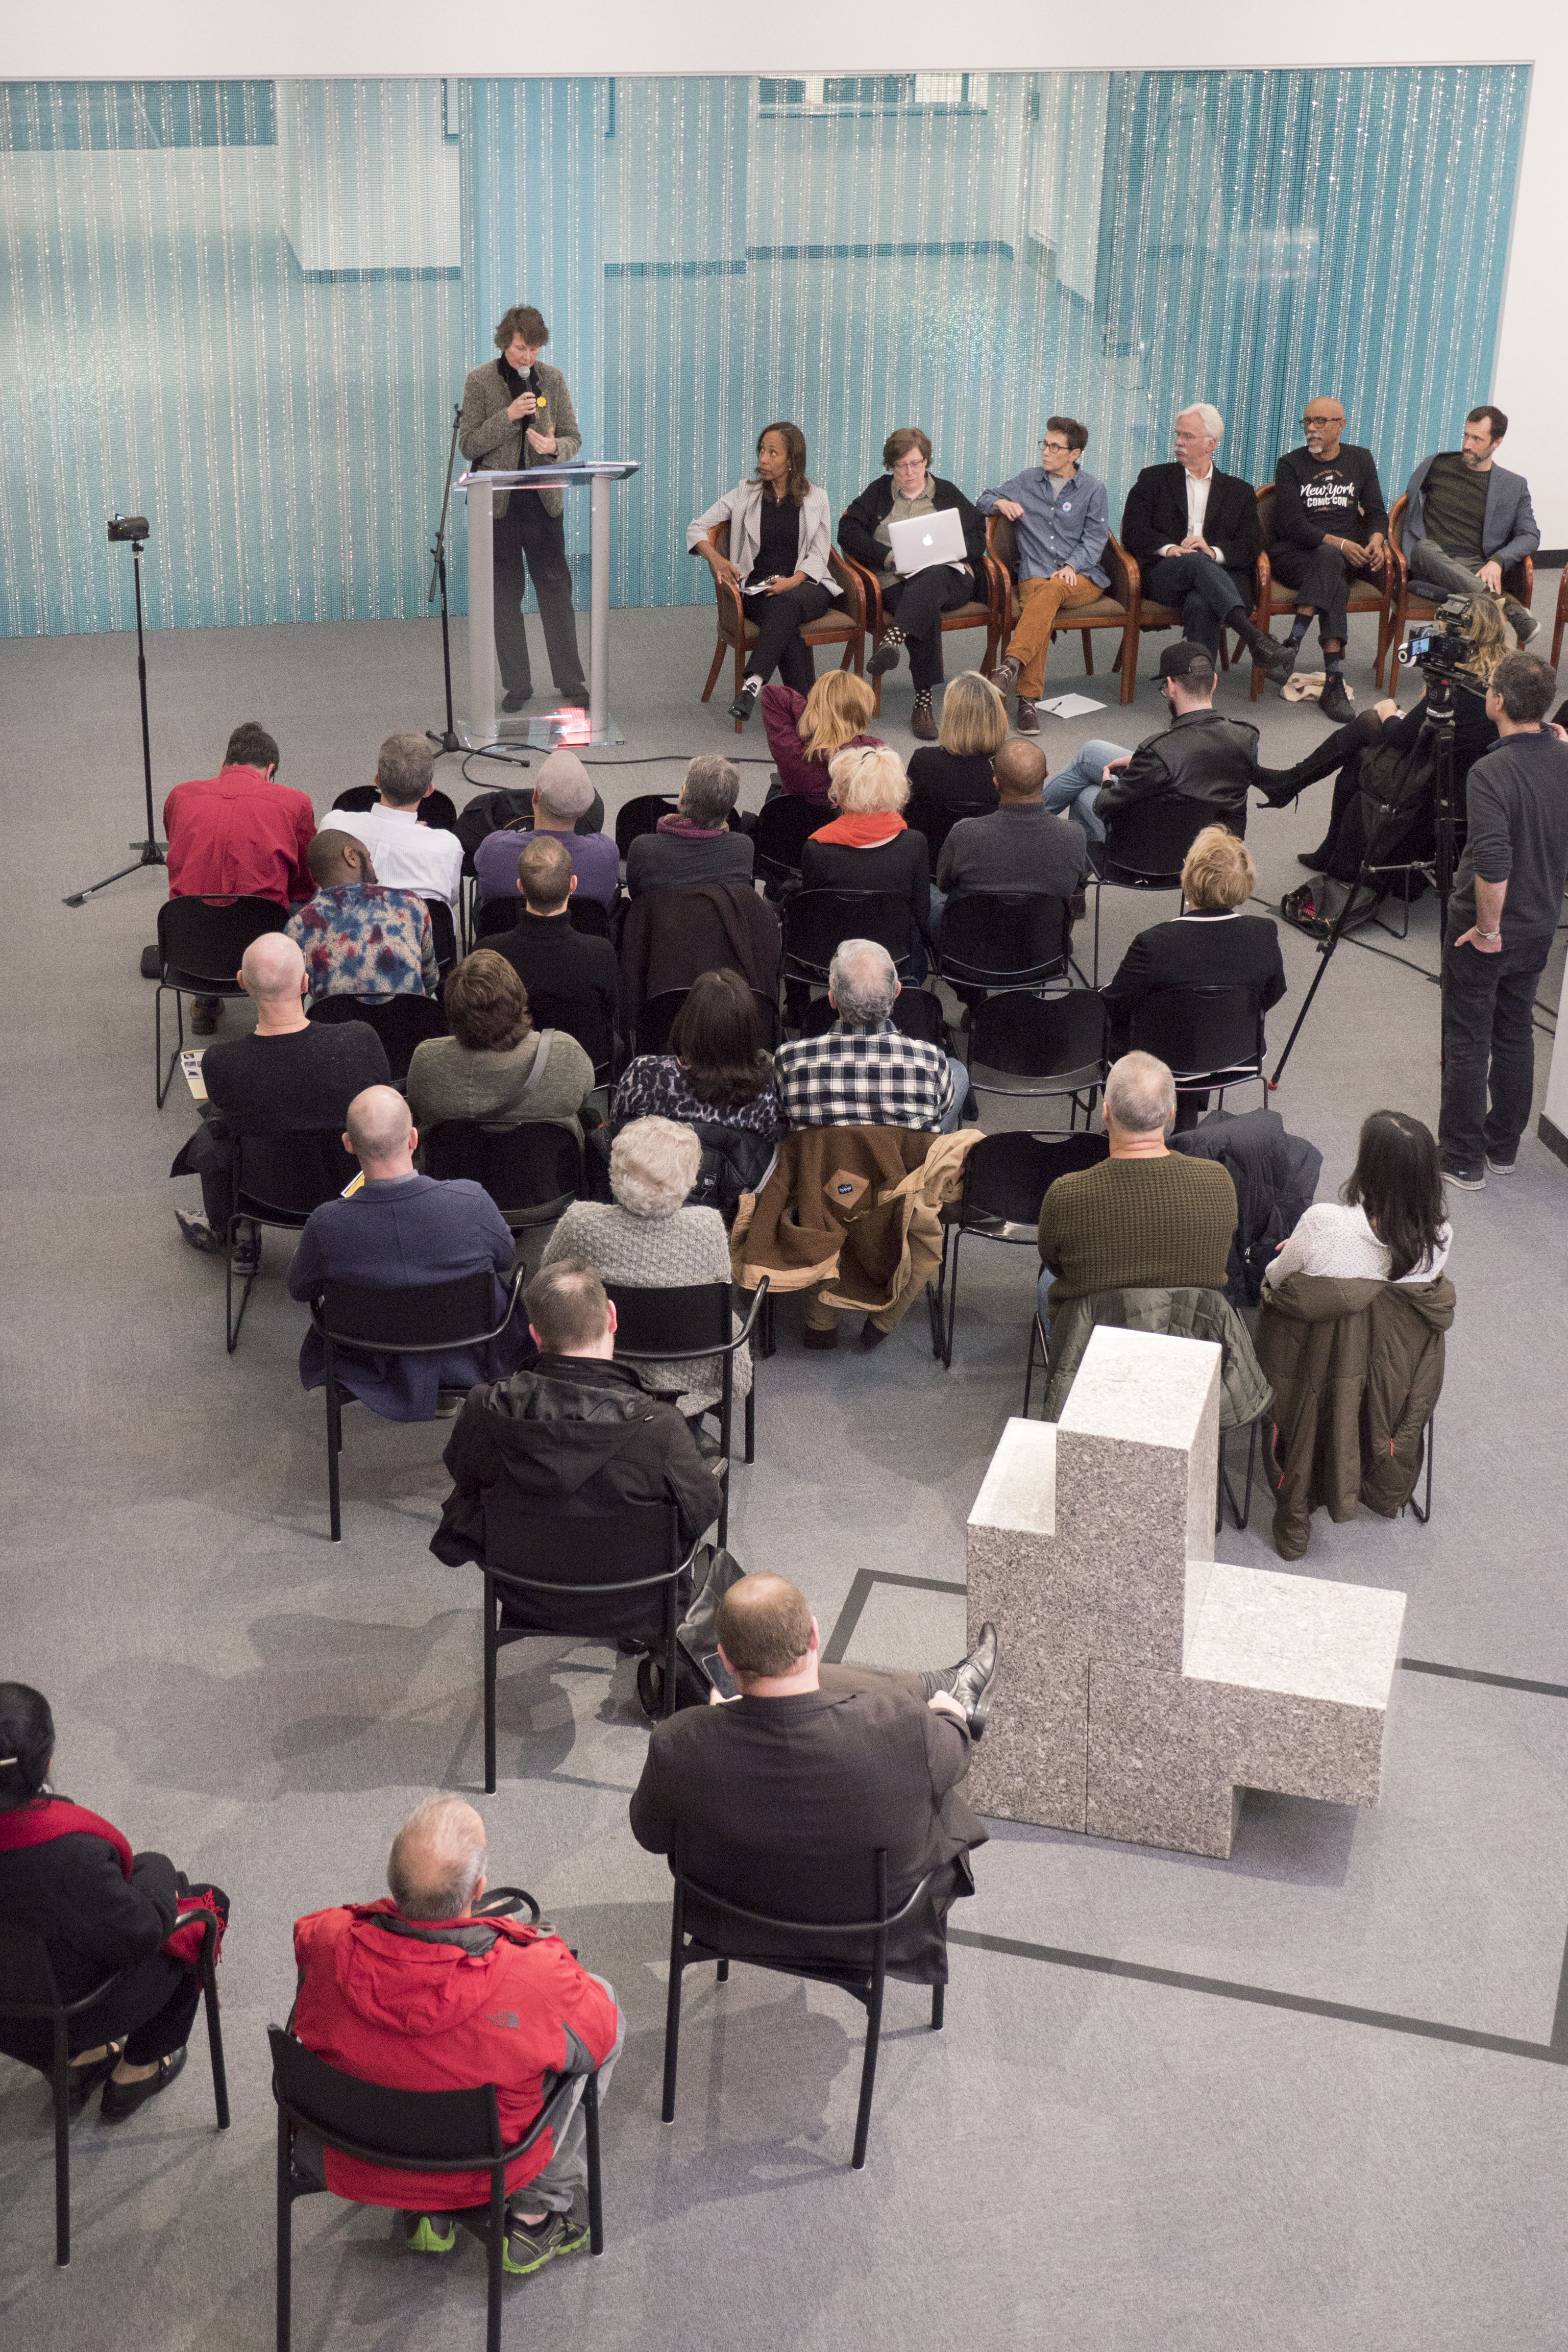 Panel discussion with Stephanie Stebich, director of the Tacoma Art Museum, at the podium, and Scott Burton’s Untitled. Image by JI Yang December 3, 2016